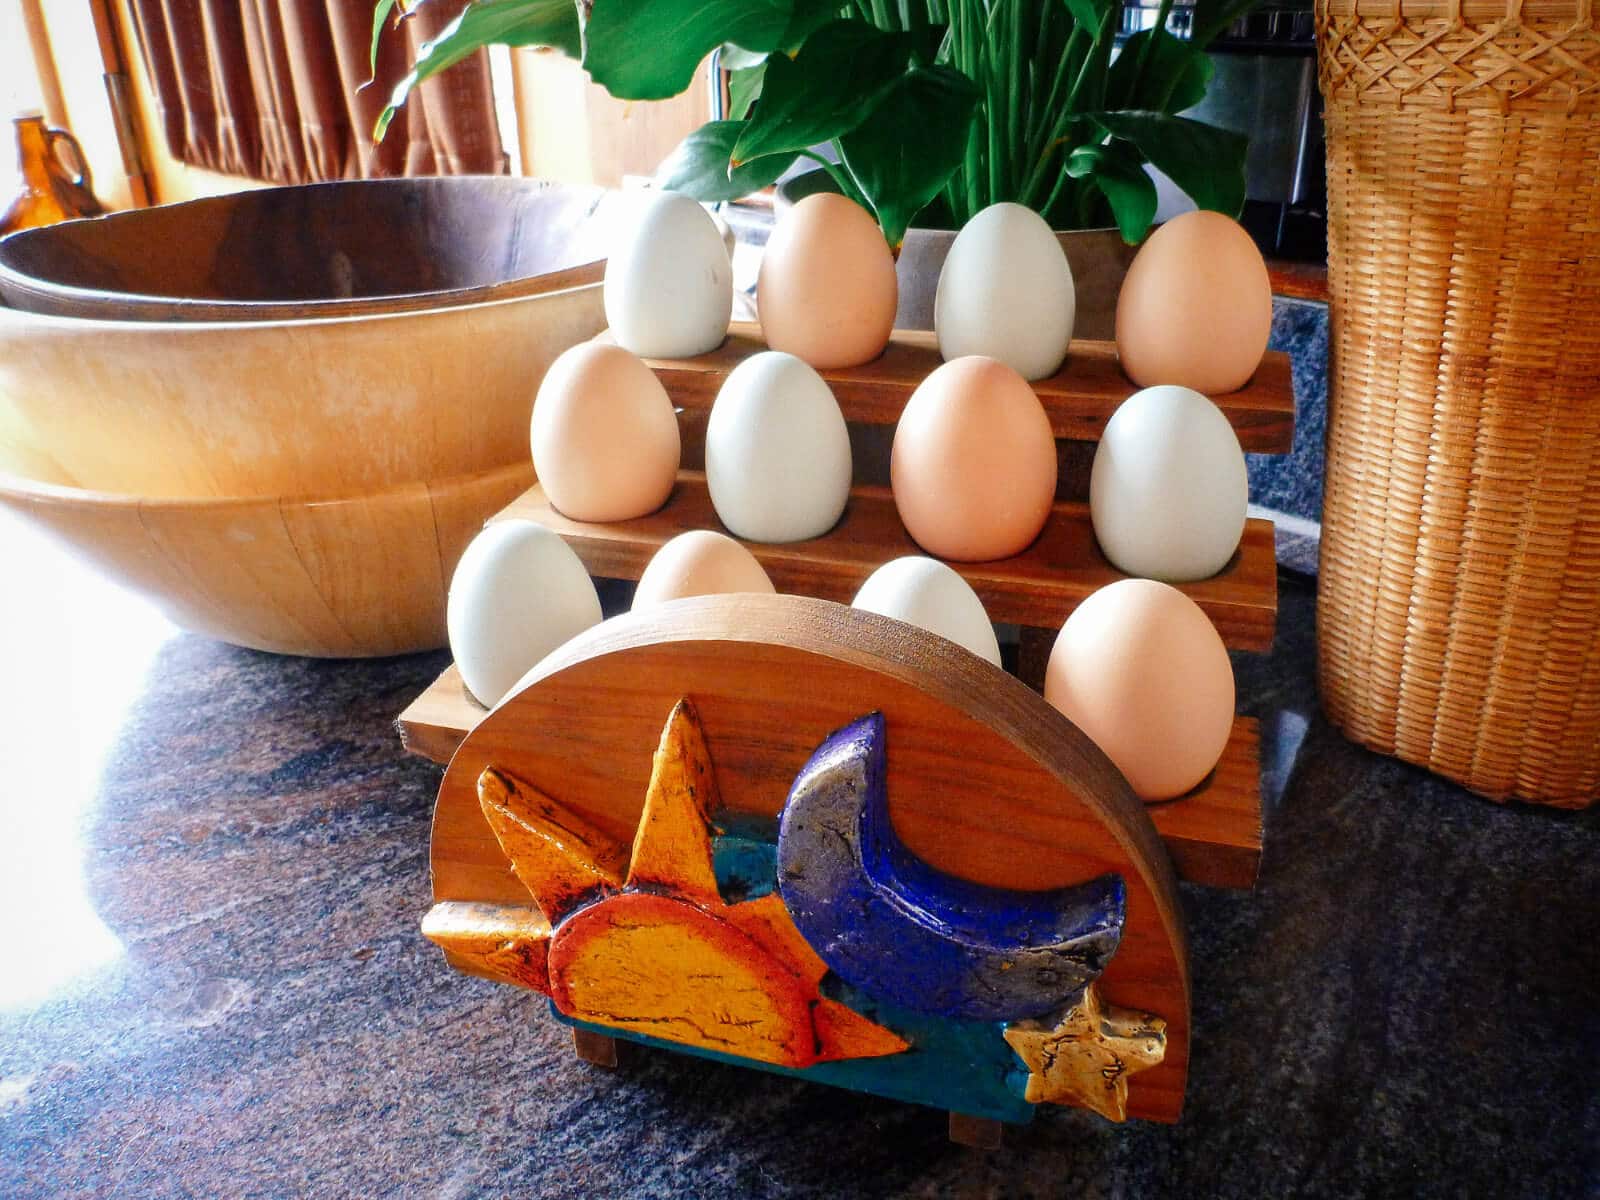 Backyard eggs stored in a wooden egg holder on the counter